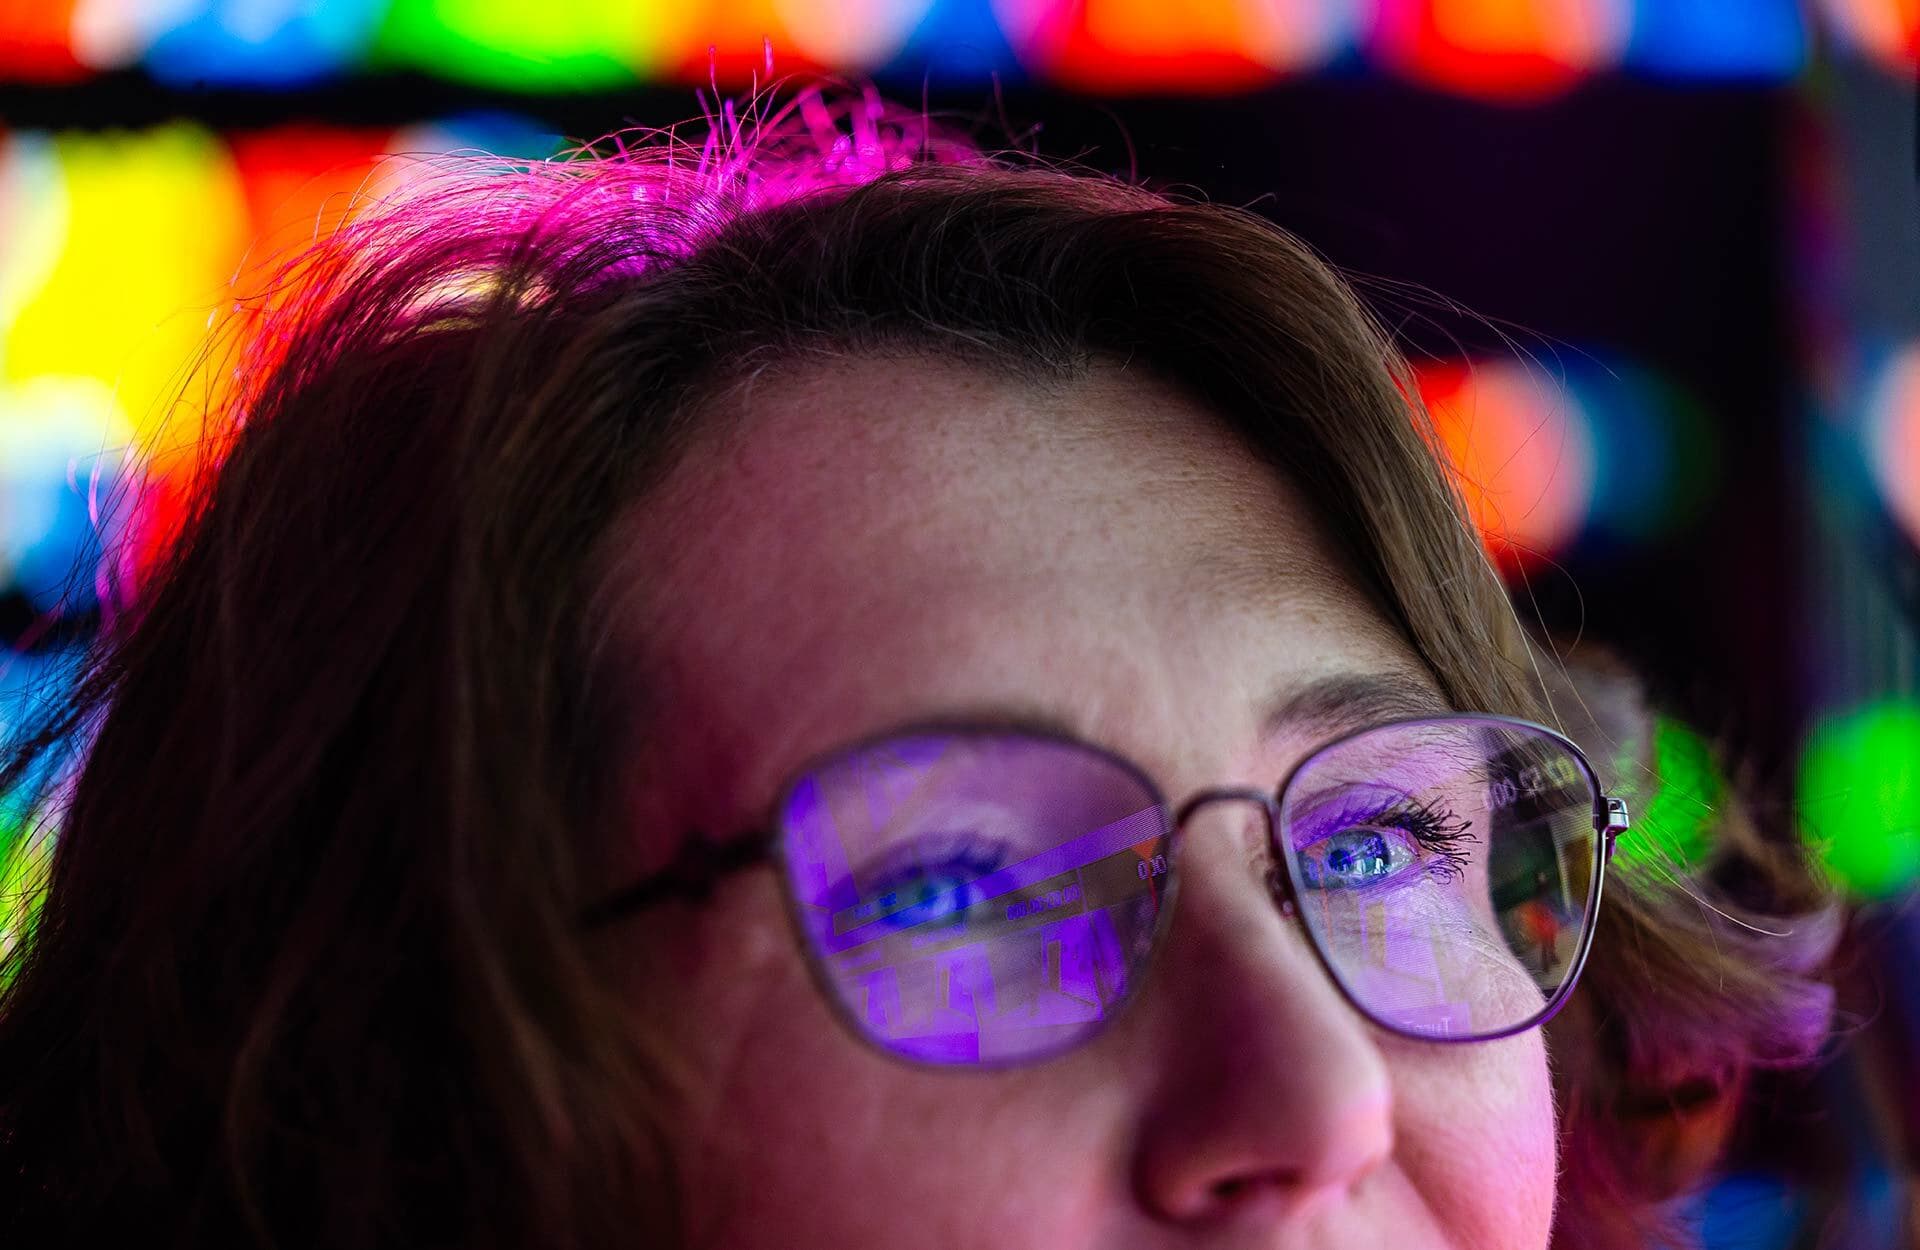 Close-up of a woman's eyes and hair as her glasses have a purple glare